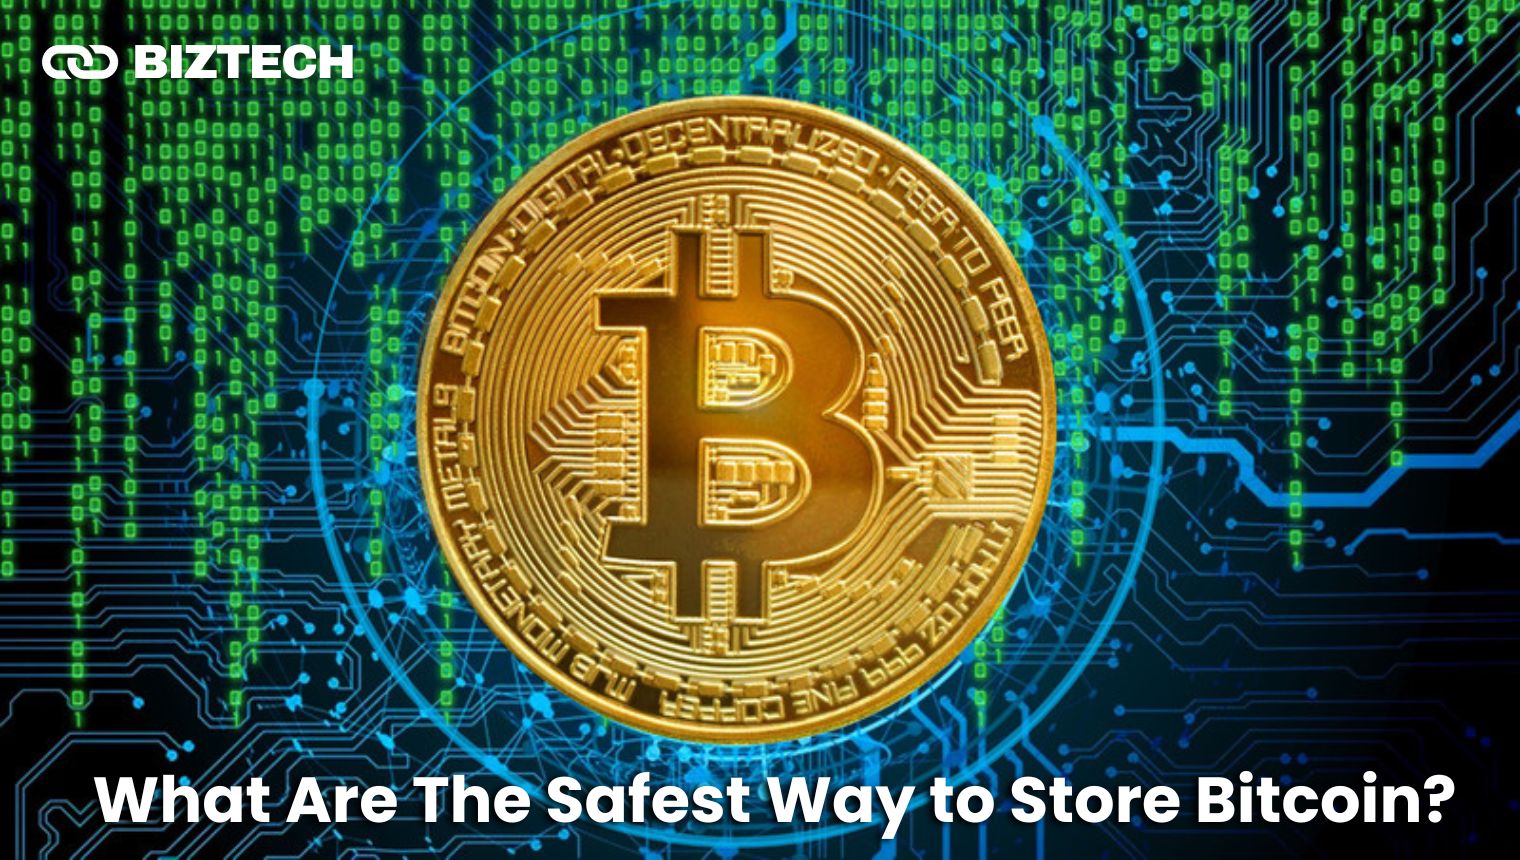 Safest way to store Bitcoin